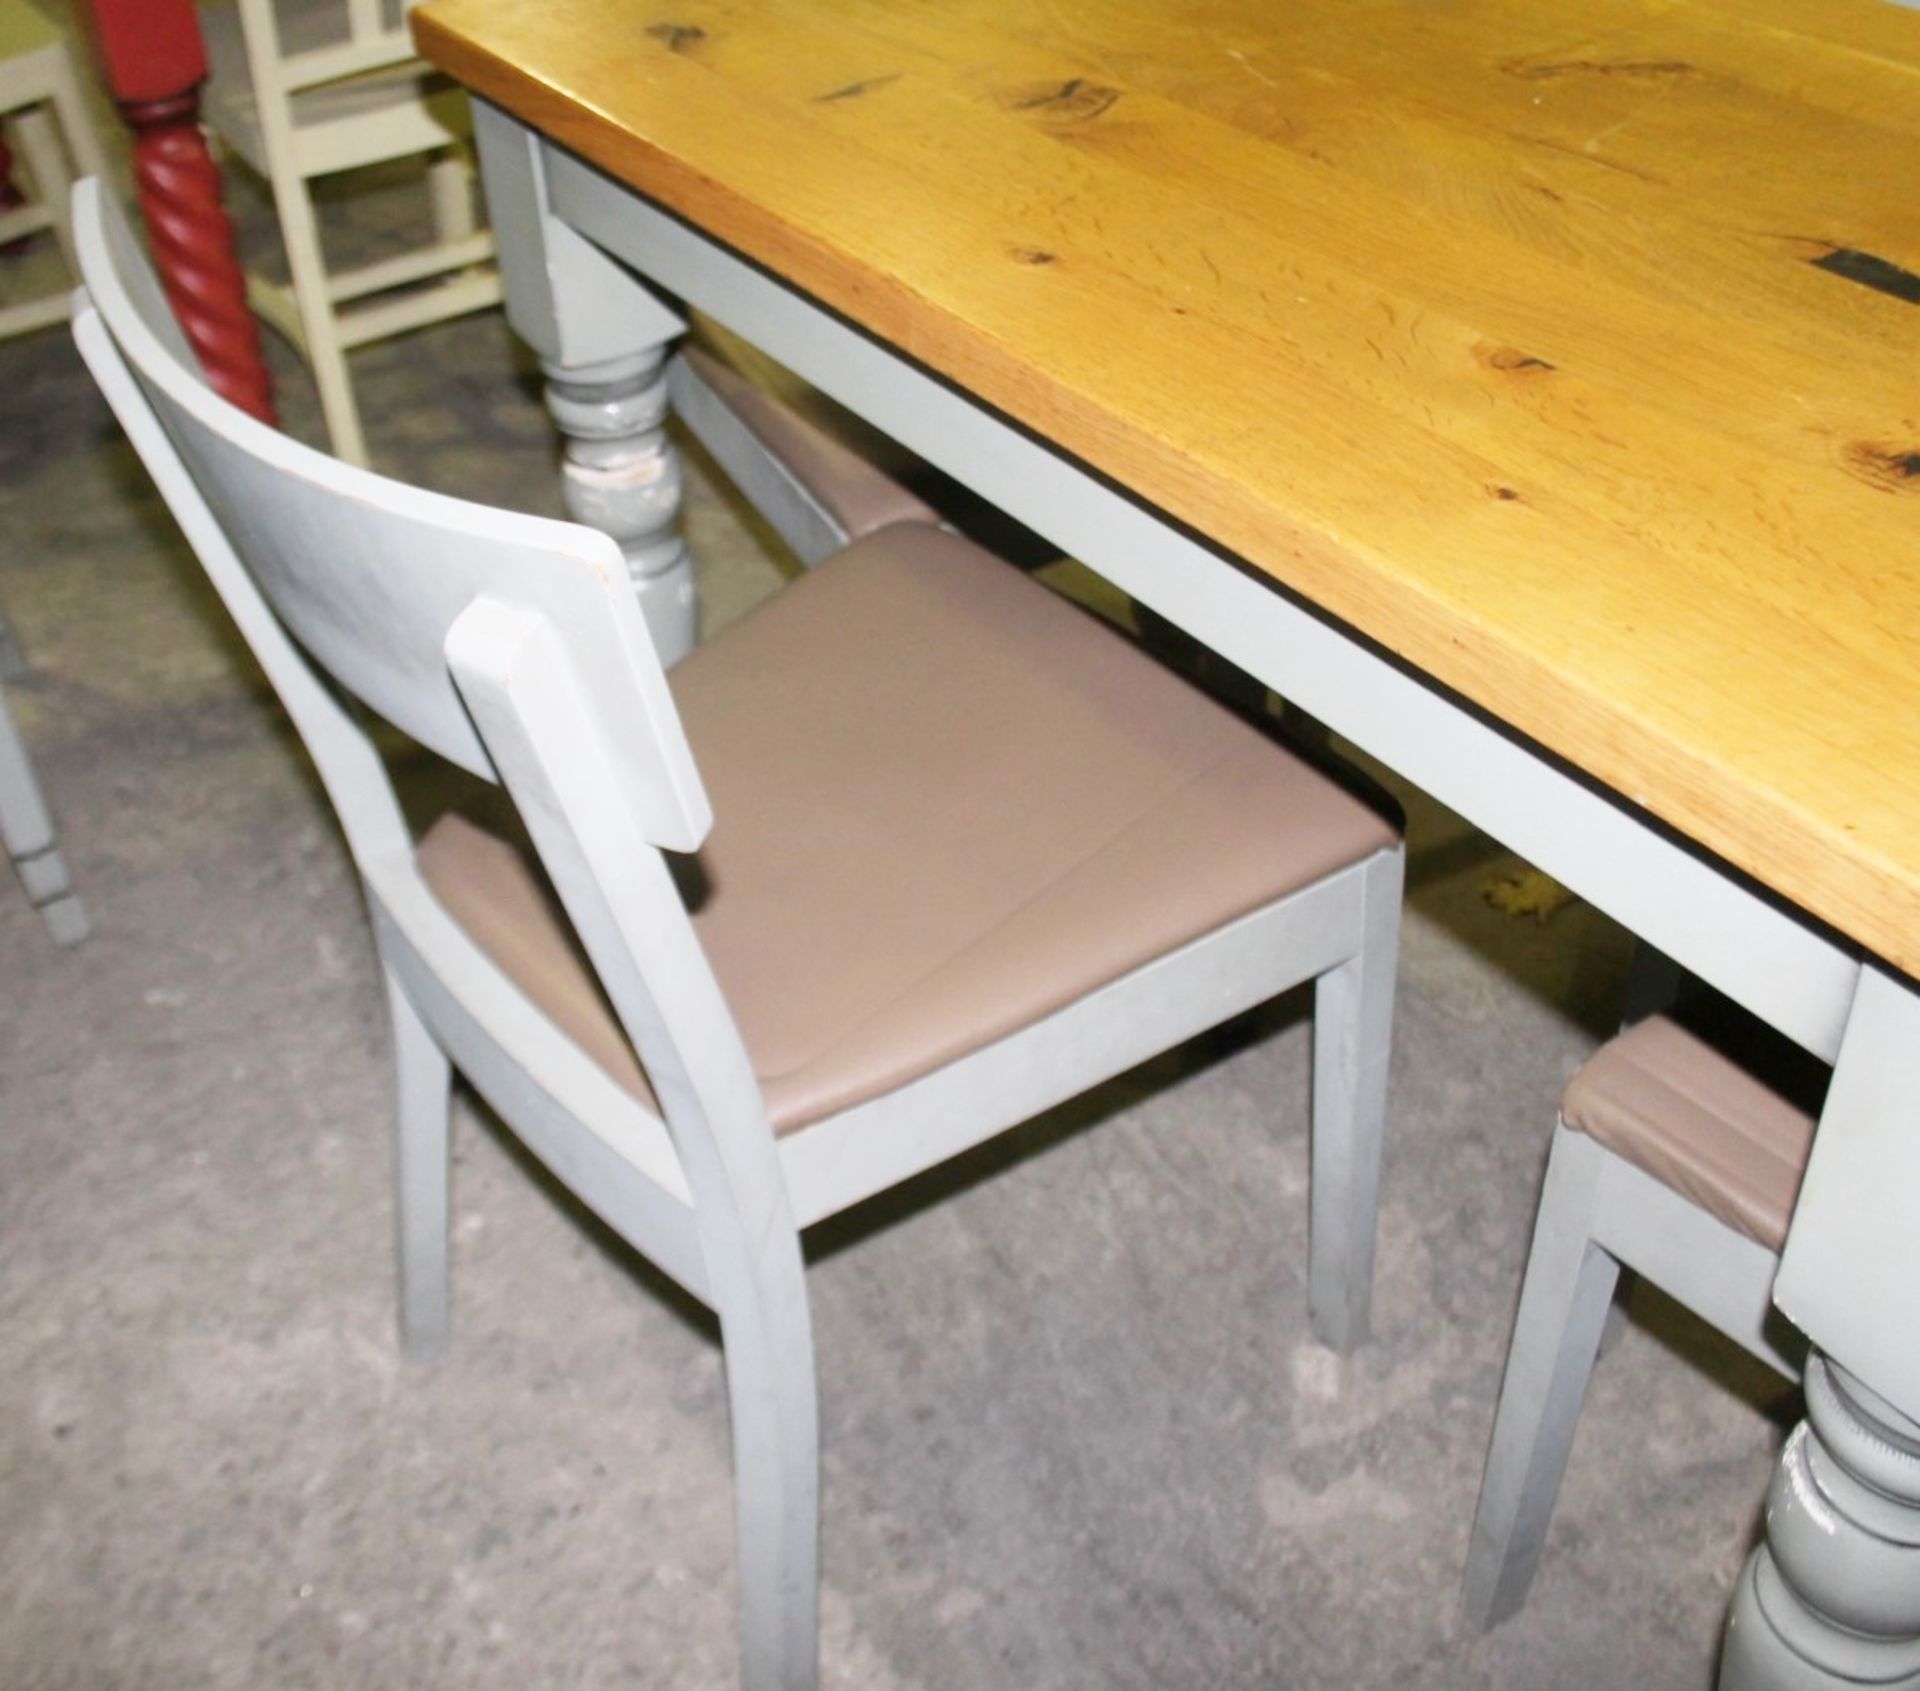 1 x Solid Wood Farmhouse Dining Table With 4 x Chairs Features Solid Oak Table Top and Upholstered - Image 3 of 6